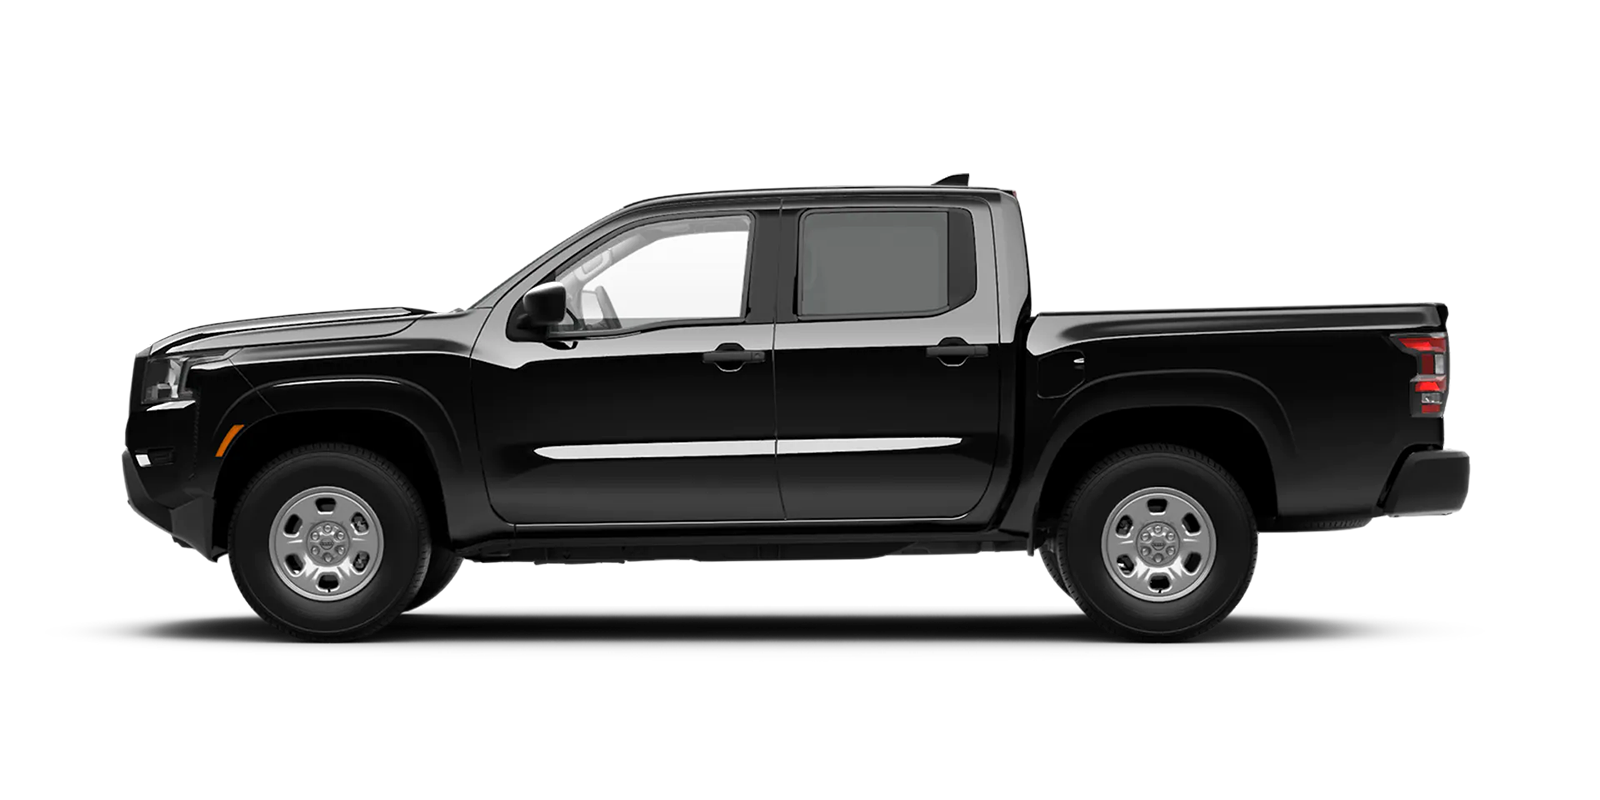 2022 Frontier Crew Cab S 4x2 in Super Black | Courtesy Nissan PA in Altoona PA